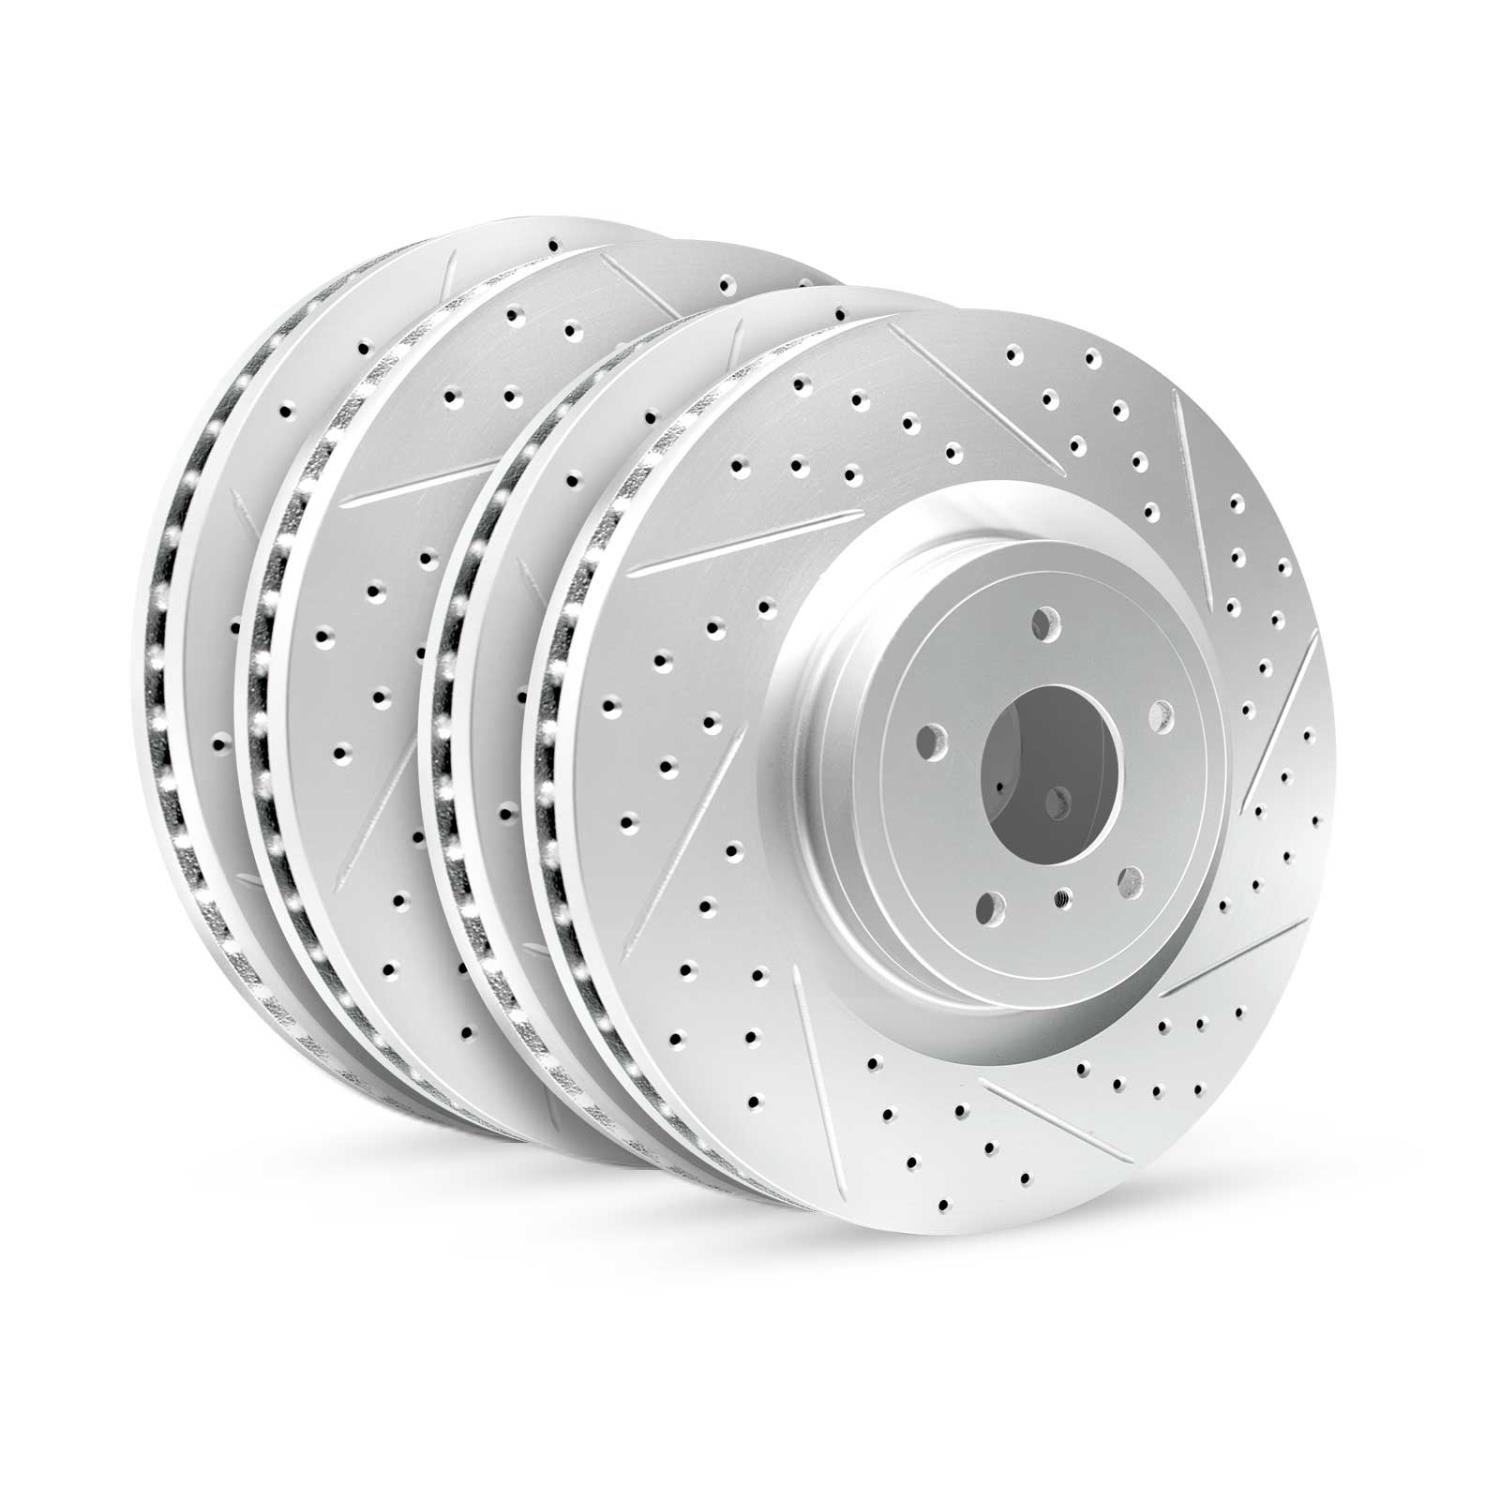 GEO-Carbon Drilled/Slotted Rotors, 2012-2015 Acura/Honda, Position: Front/Rear